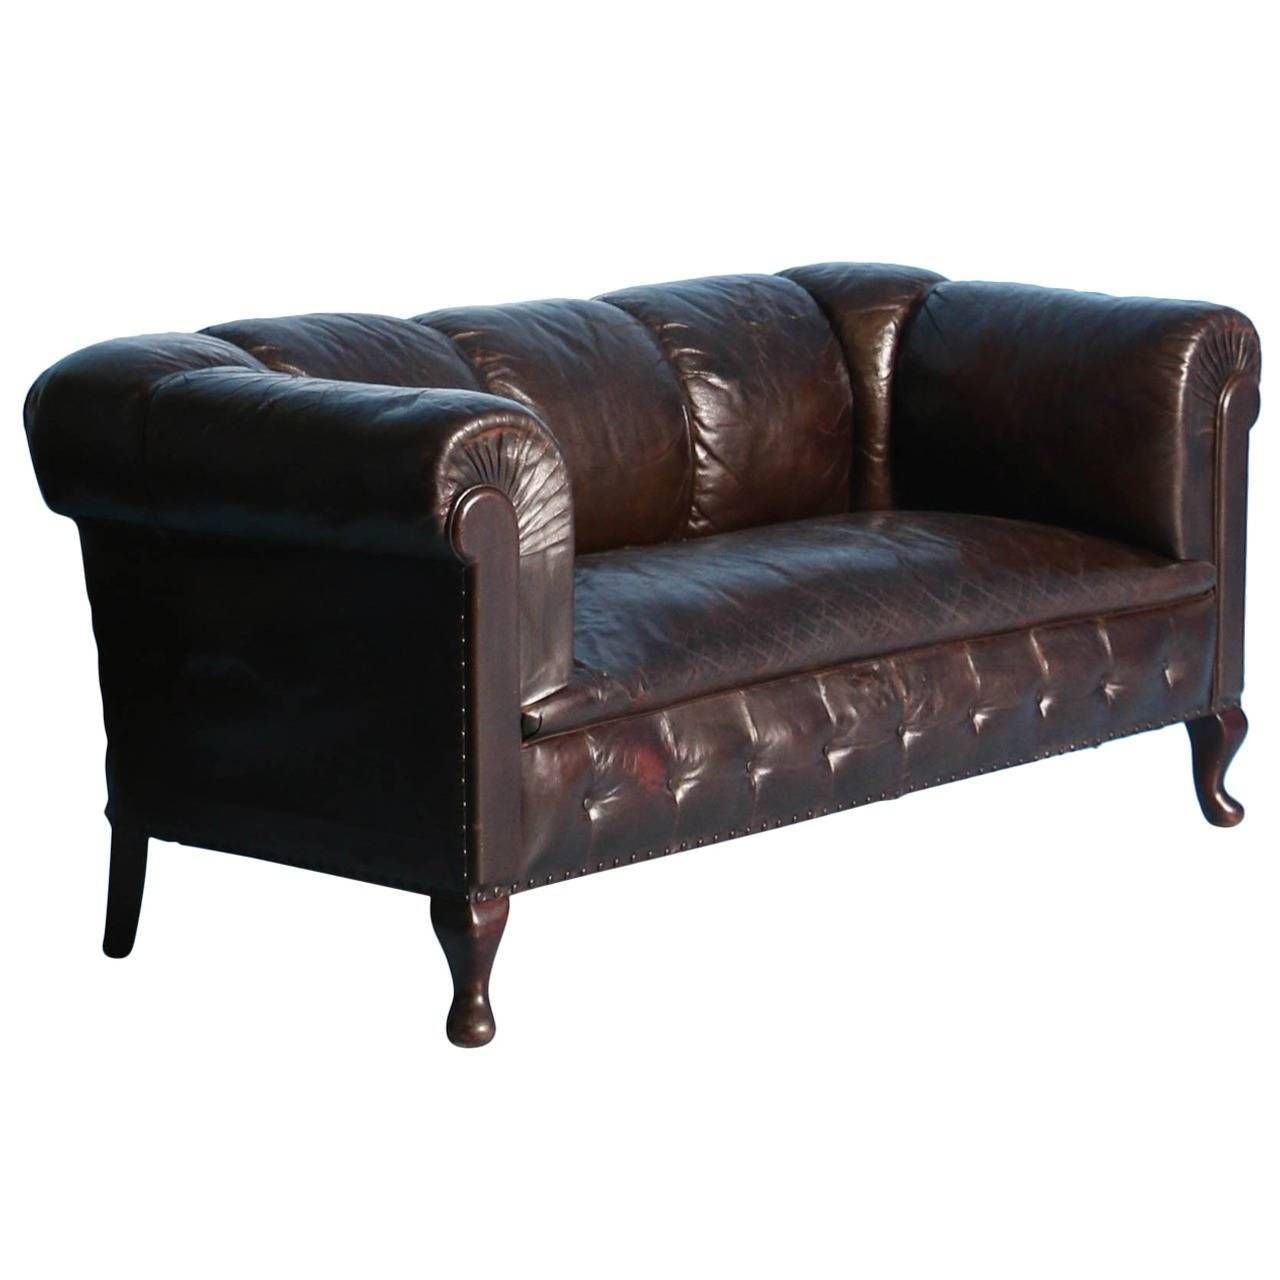 Small Vintage Chesterfield Sofa, England, Circa 1920 – 1940 At 1stdibs Intended For Chesterfield Black Sofas (Photo 29 of 30)